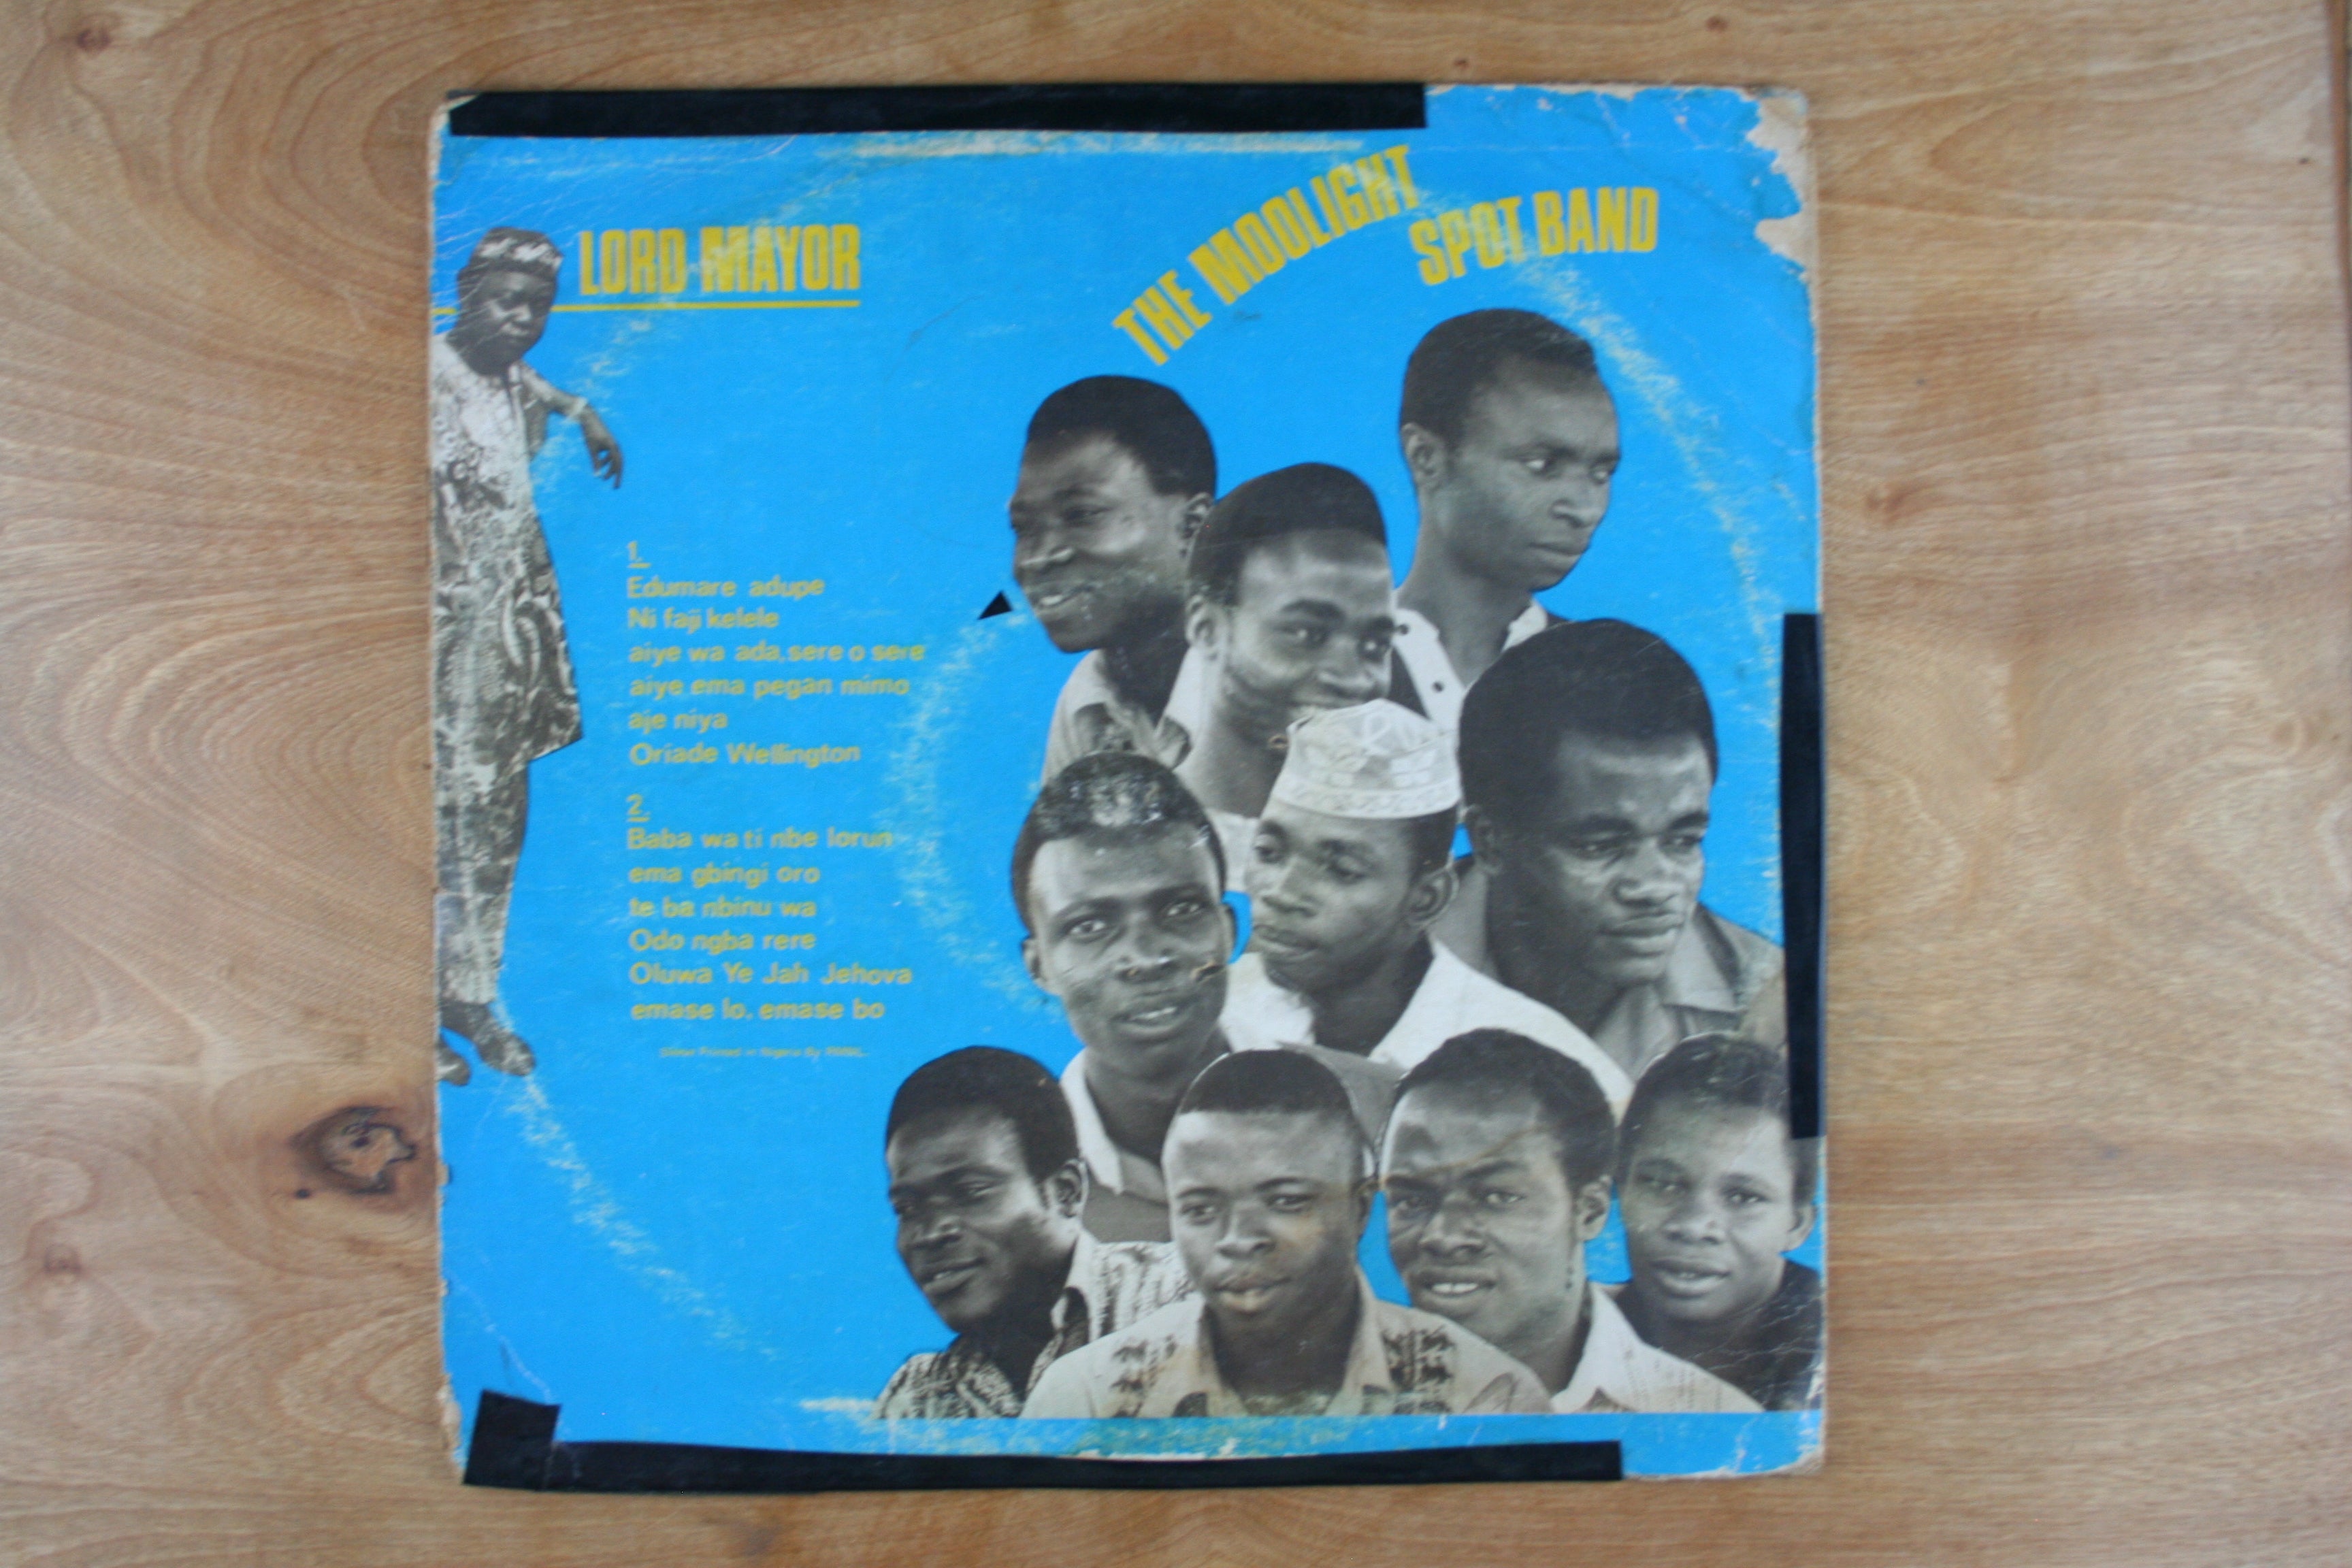 Mayor Sule Agboola & His Moonlight Spot Band - S/t